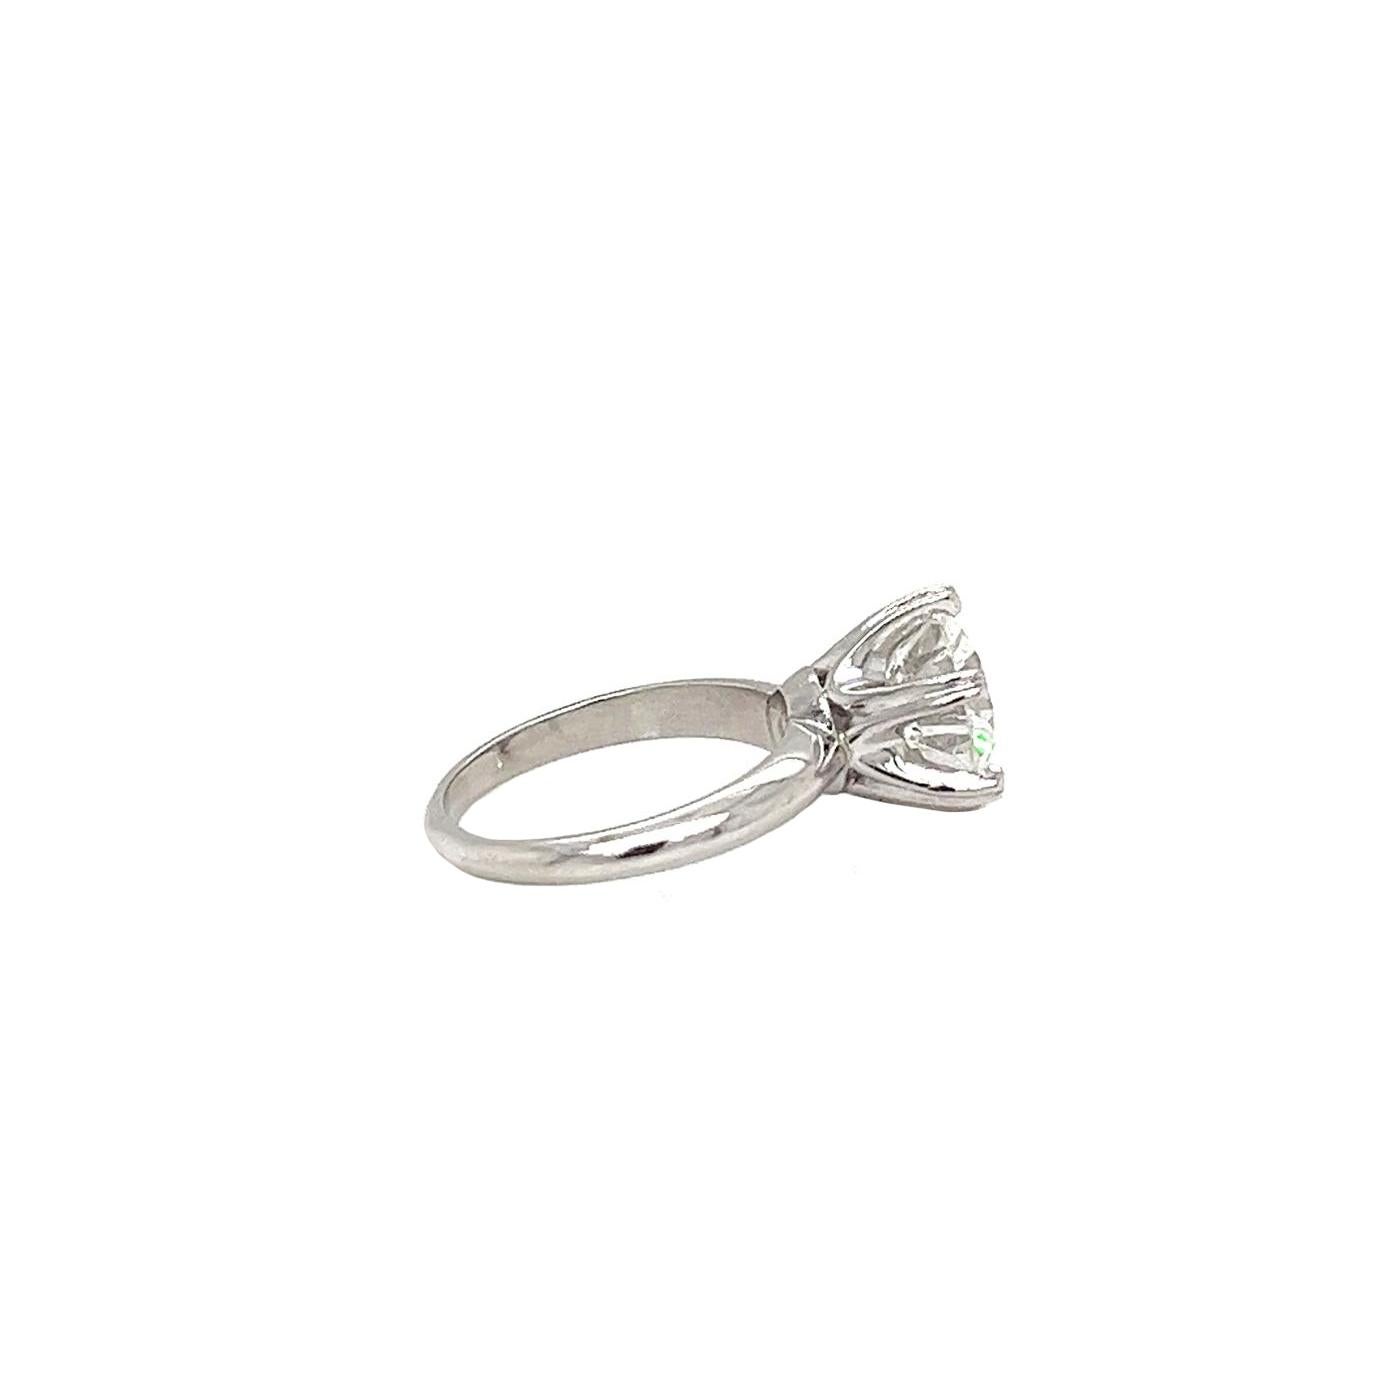 3.10ct Natural Round Diamond Solitaire Ring 6 Prong 14K White Gold Si2 Clarity For Sale 1